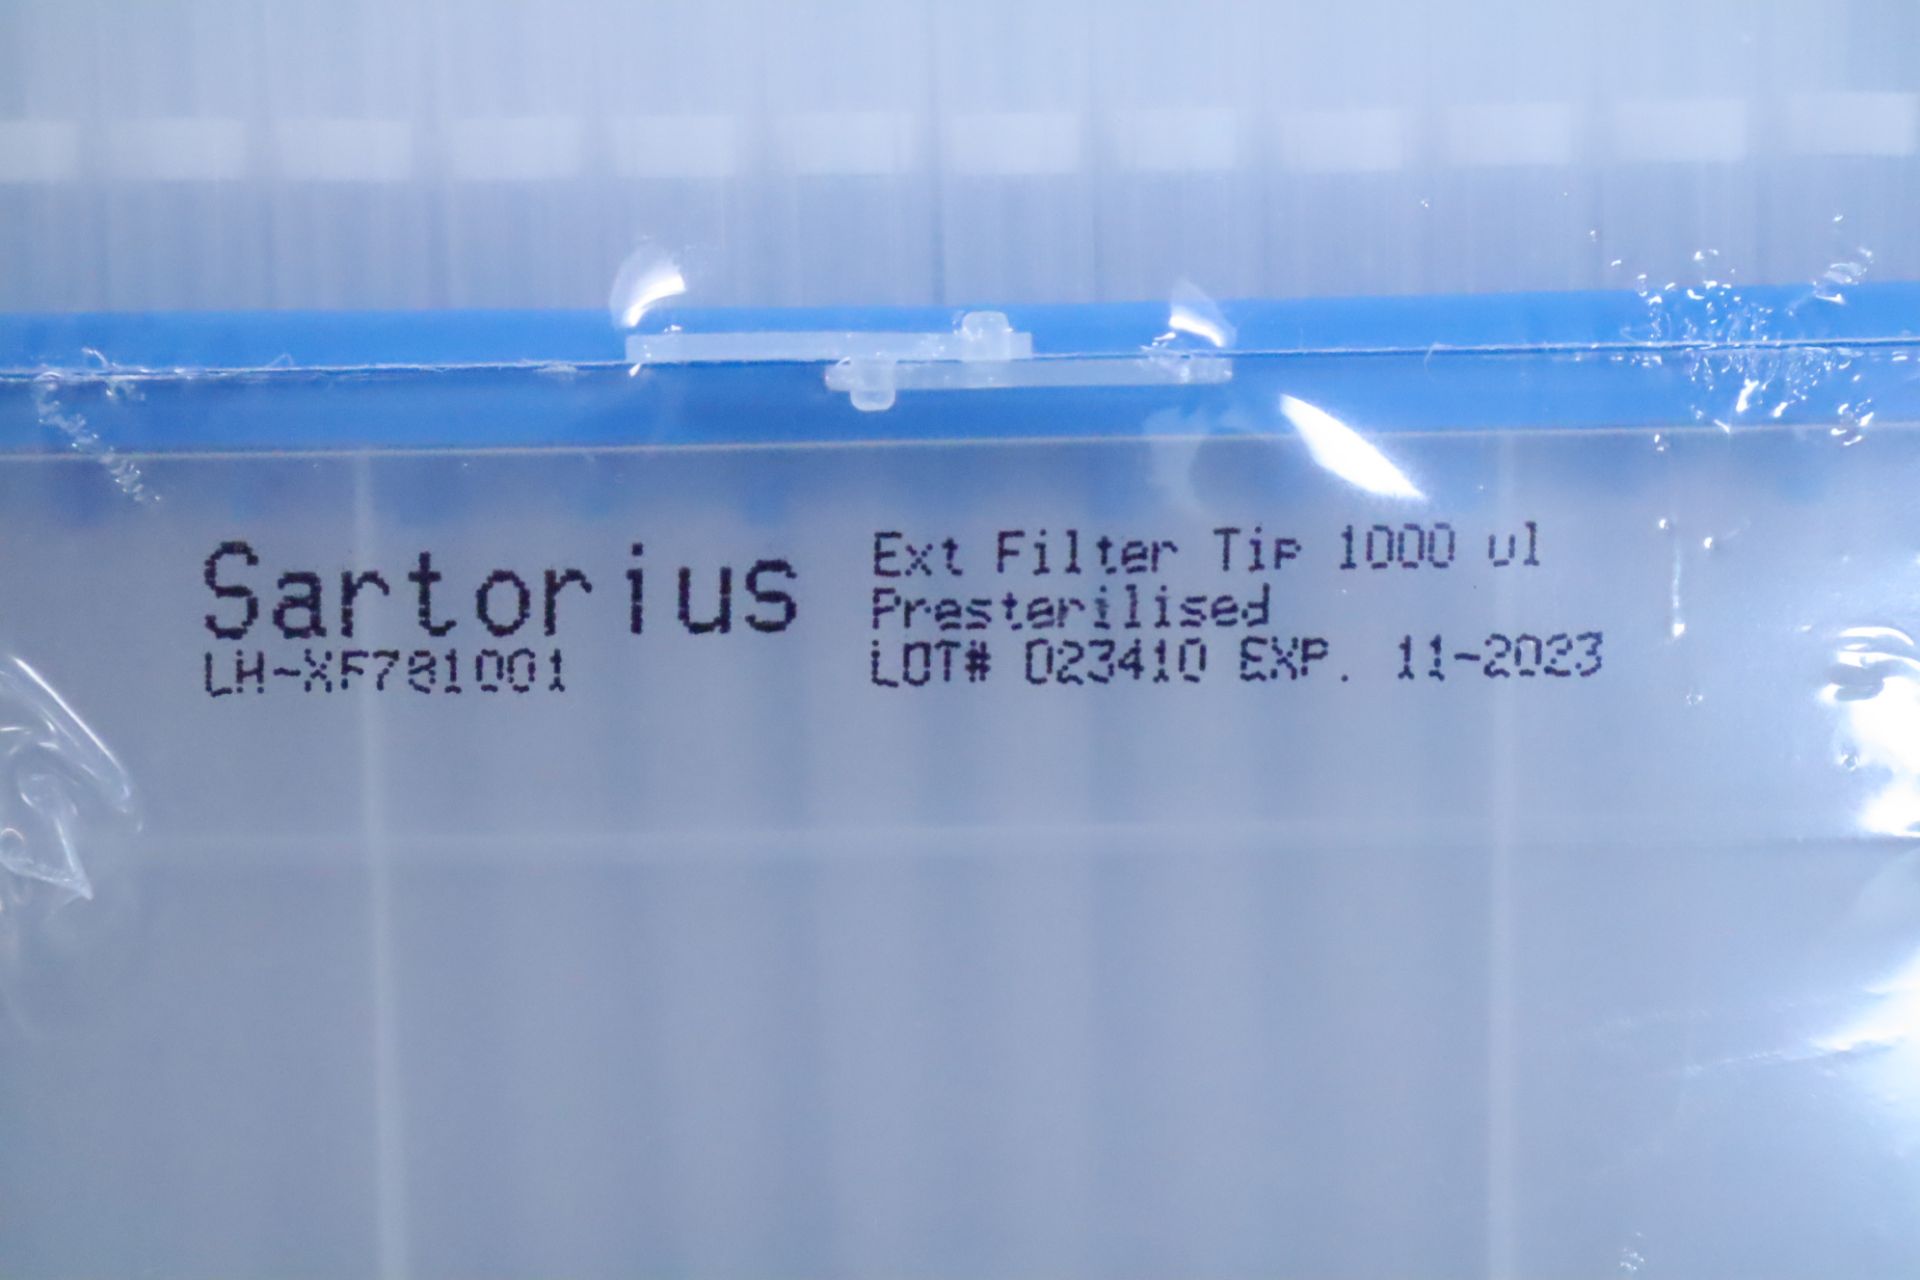 (NIB) Filter Pipette Tips 1000 uL / 96 tips per rack (Qty 34) - Image 5 of 5